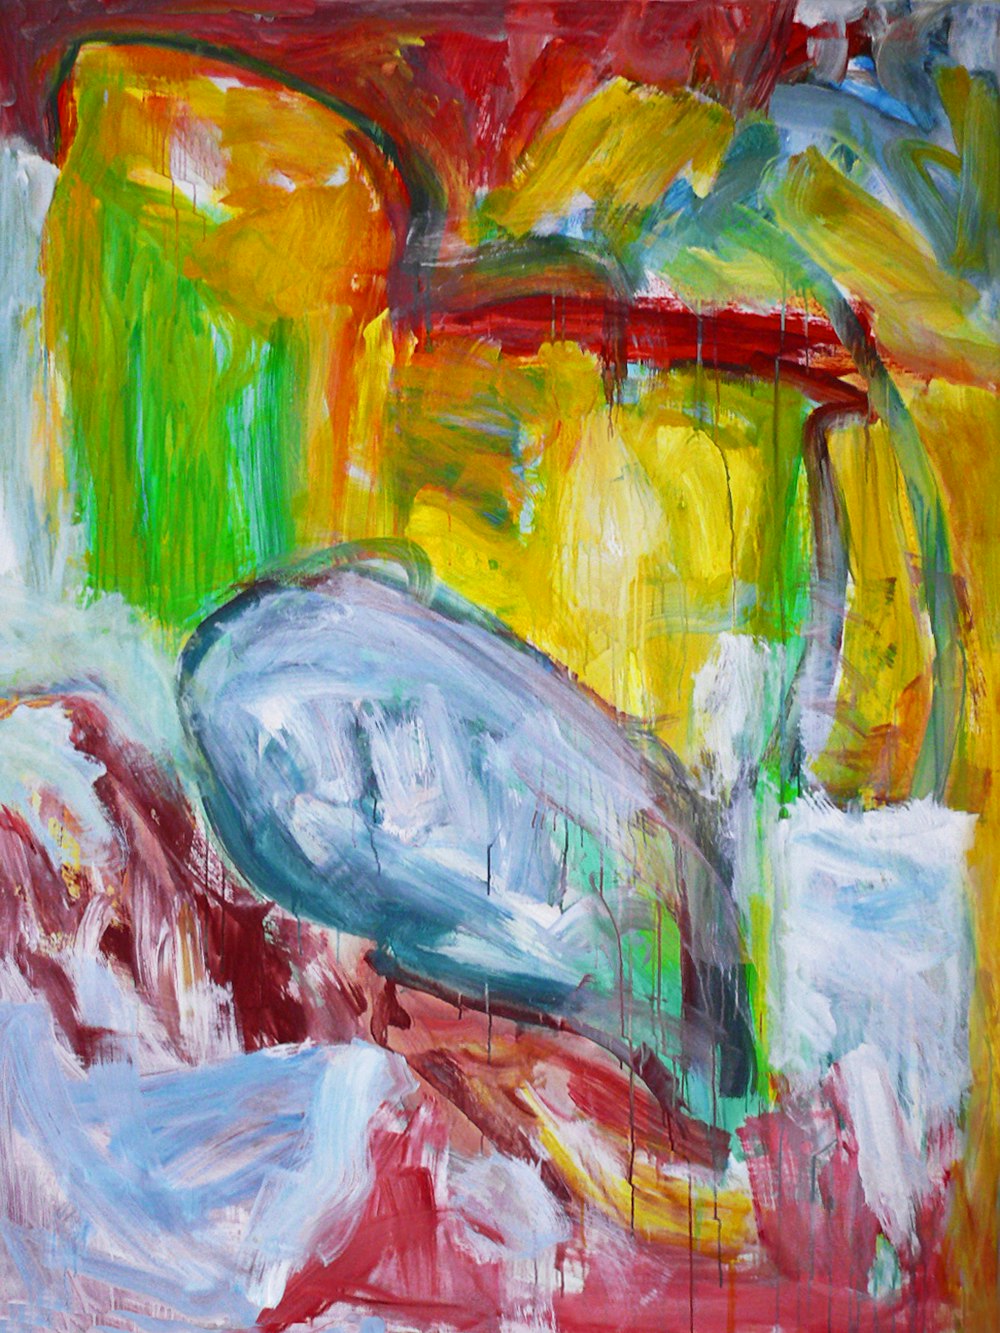 a painting of a boat on a red, yellow, and green background